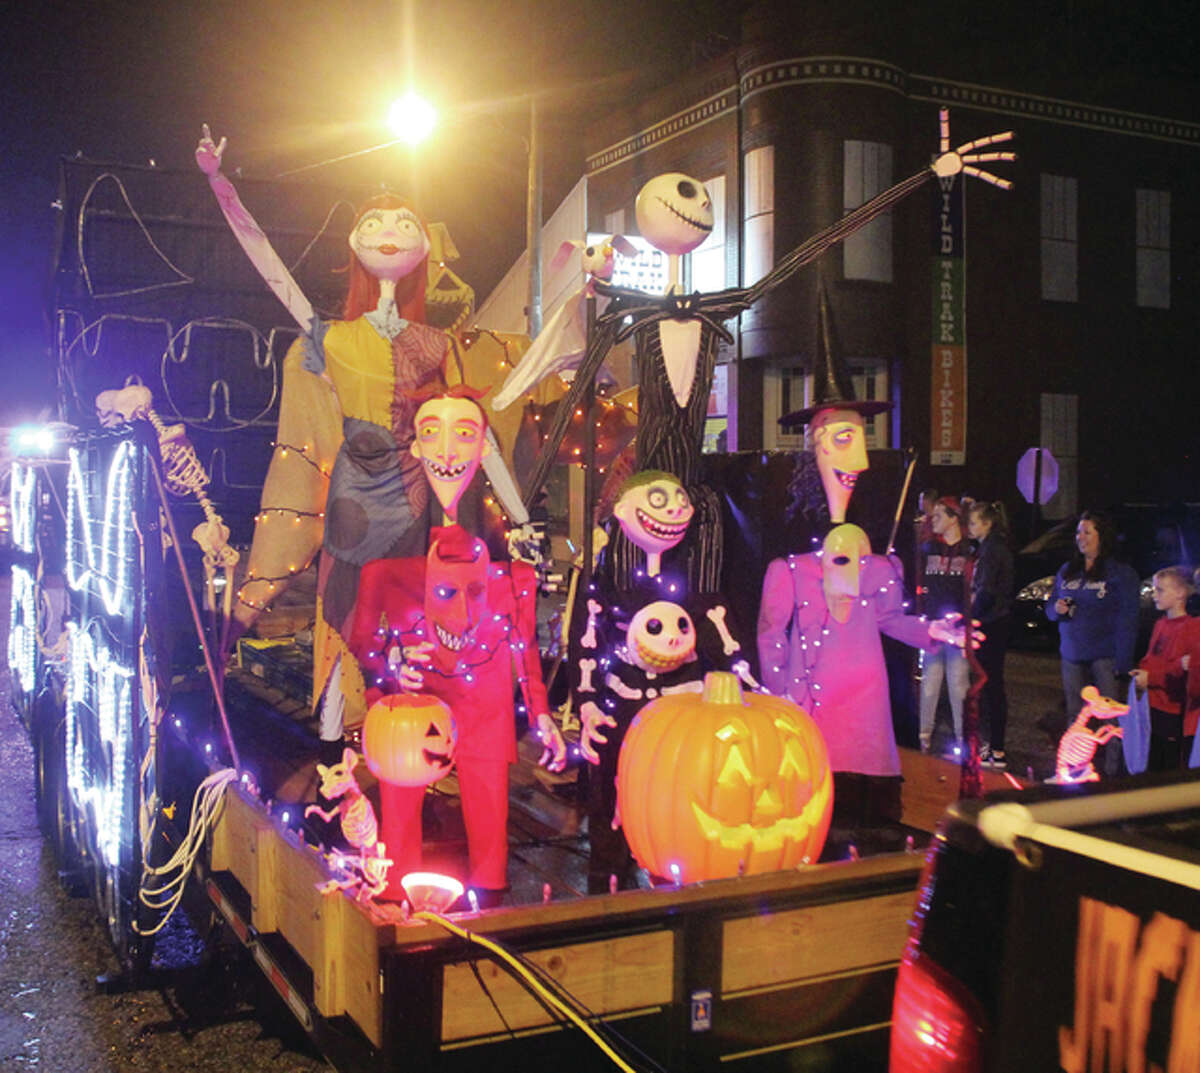 The myriad of floats from all kinds of groups and individuals are an exciting part of the the Alton annual Halloween Parade.